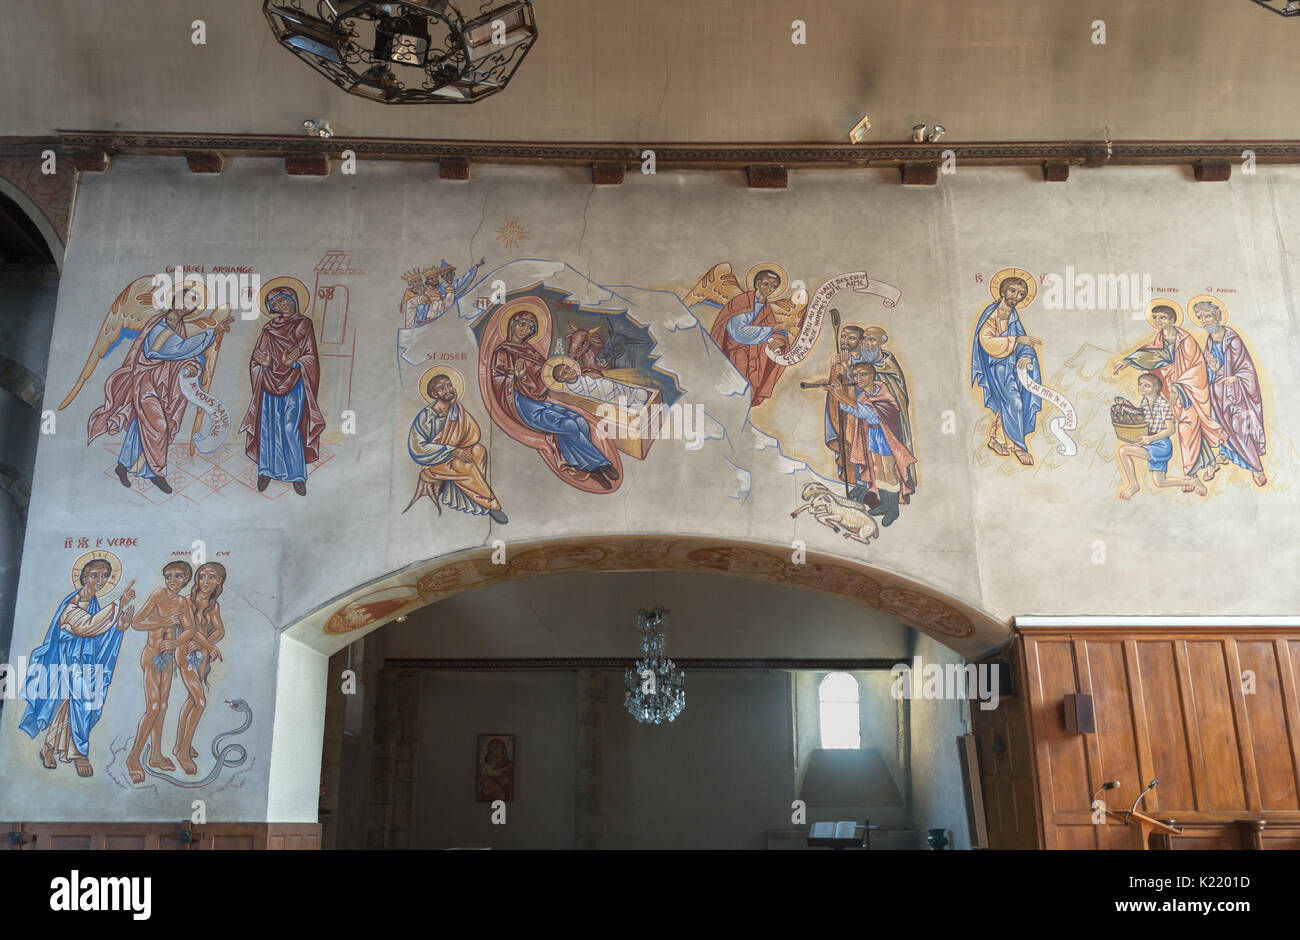 20th century frescoe within the church of Saint-Sauveur, Rochechouart, Nouvelle-Aquitaine, France,Europe Stock Photo